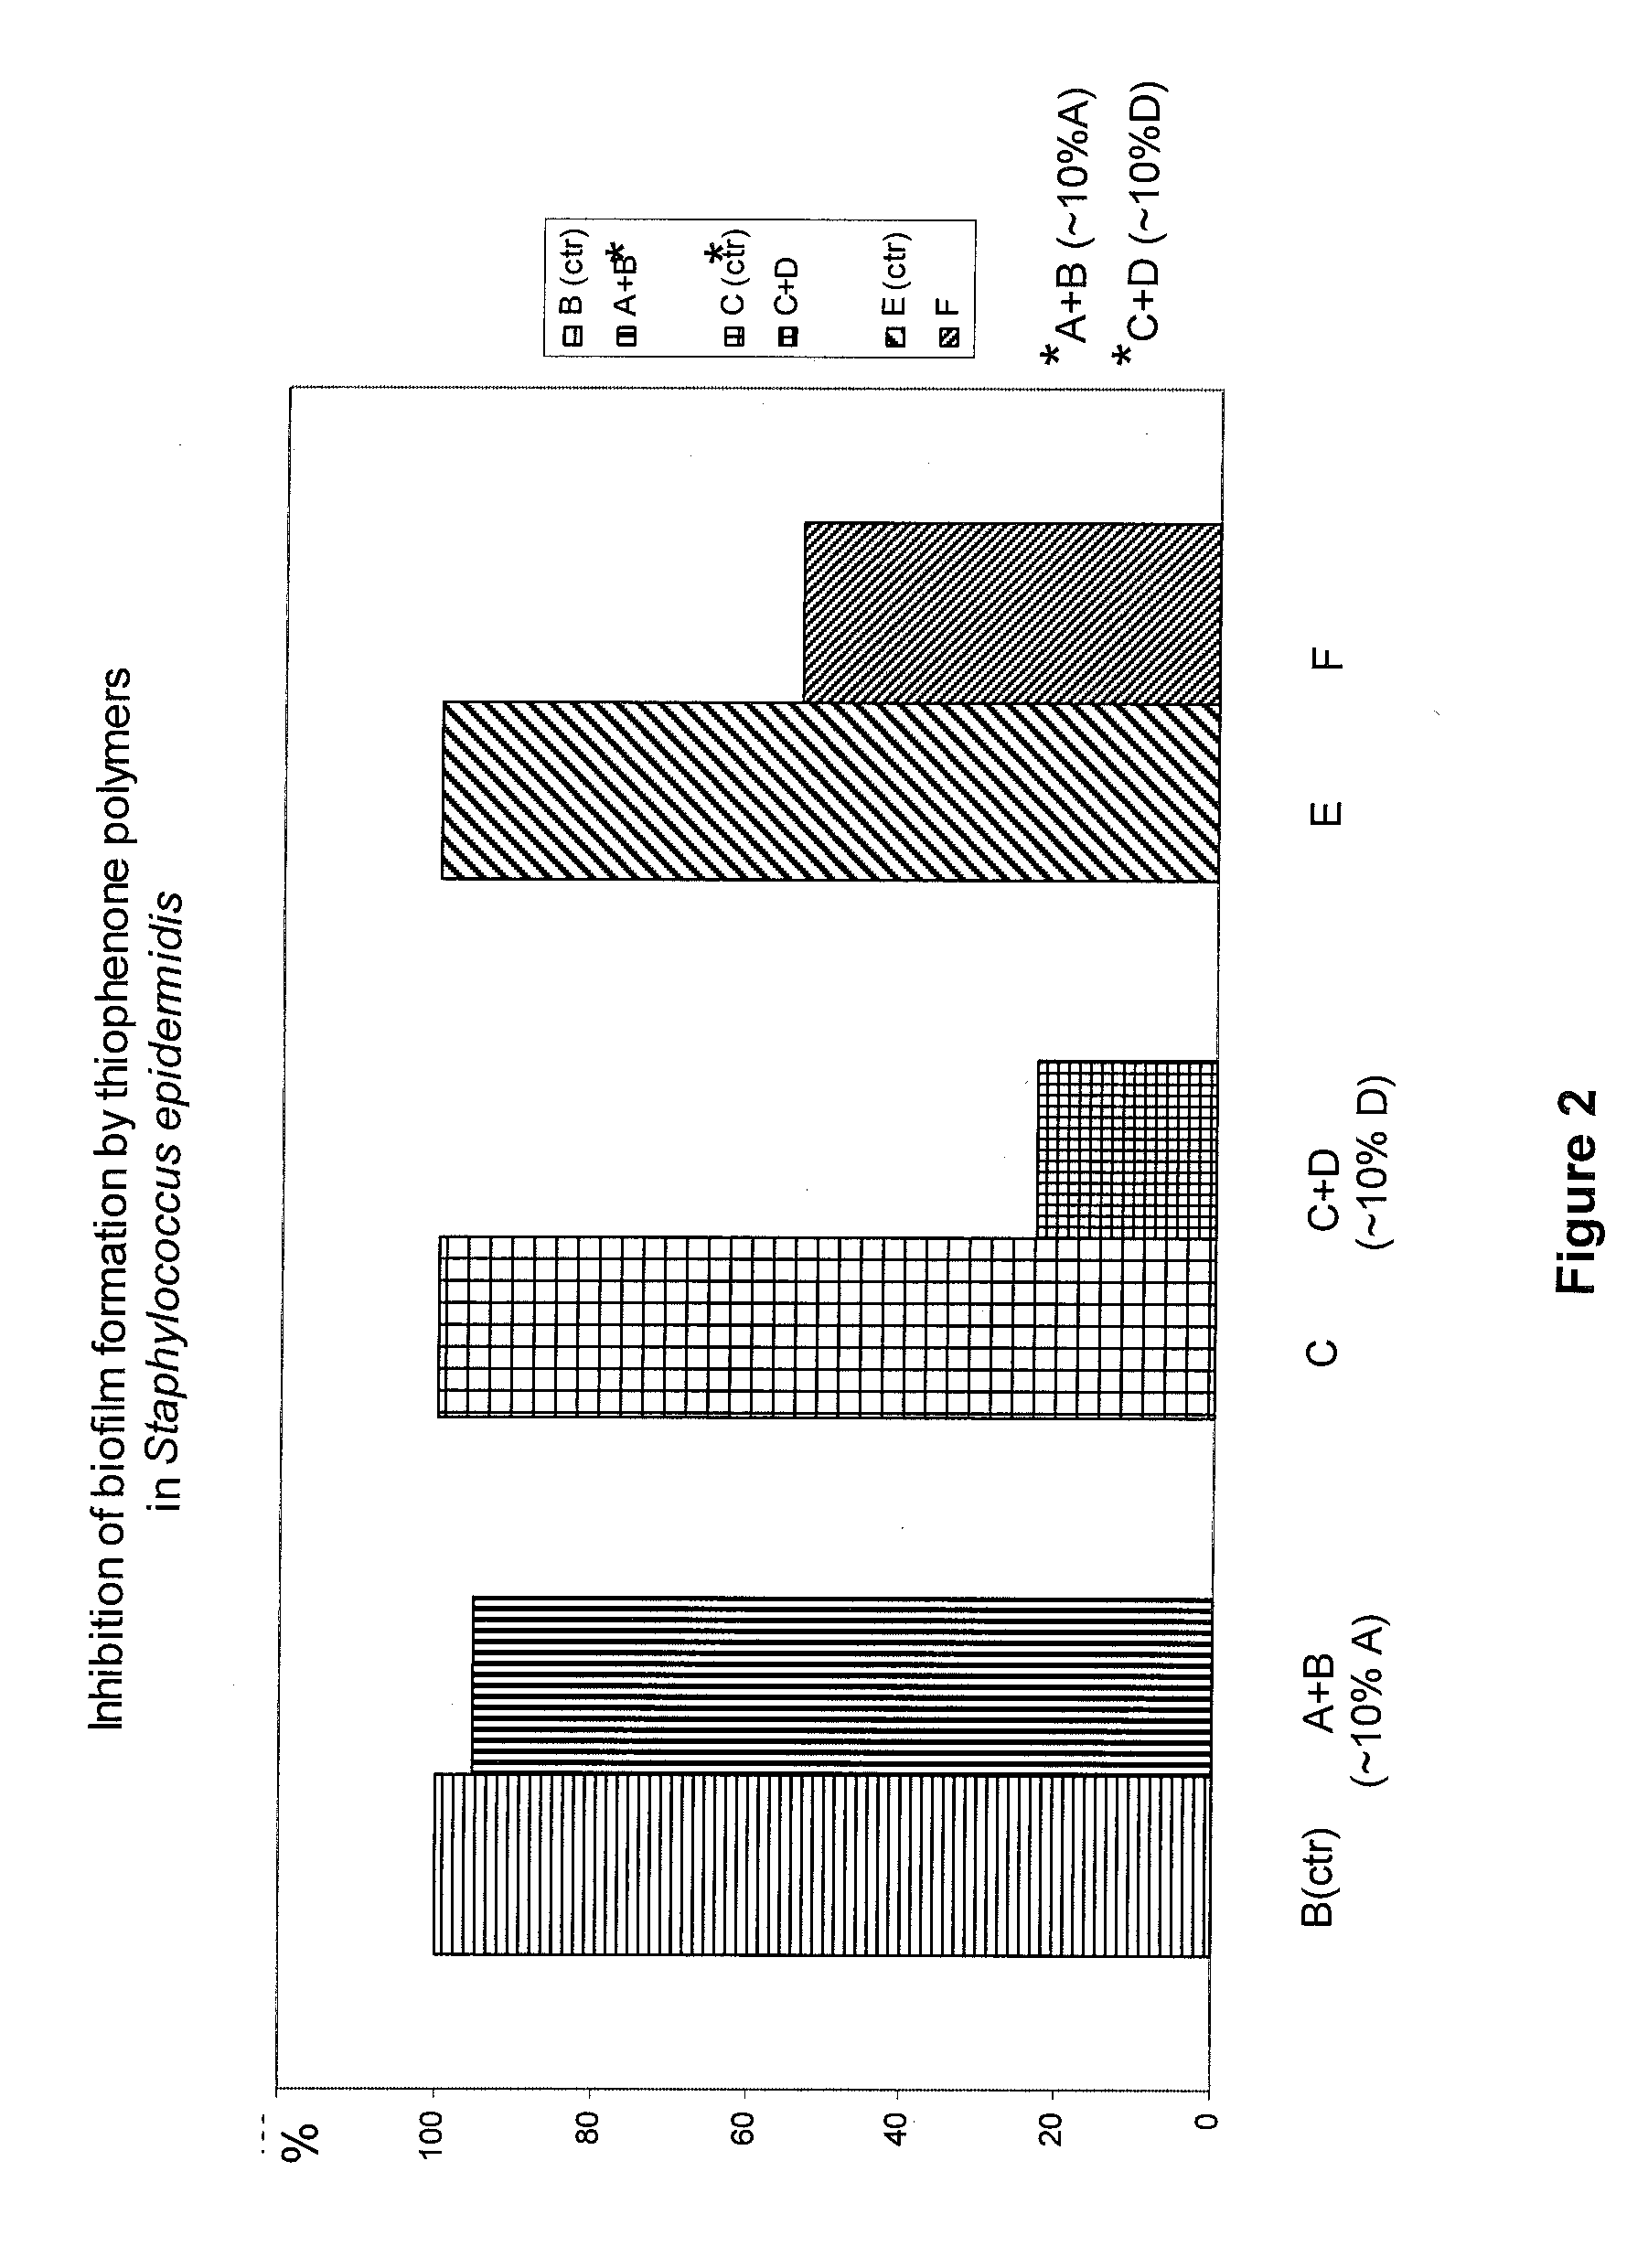 Antimicrobial compositions and uses